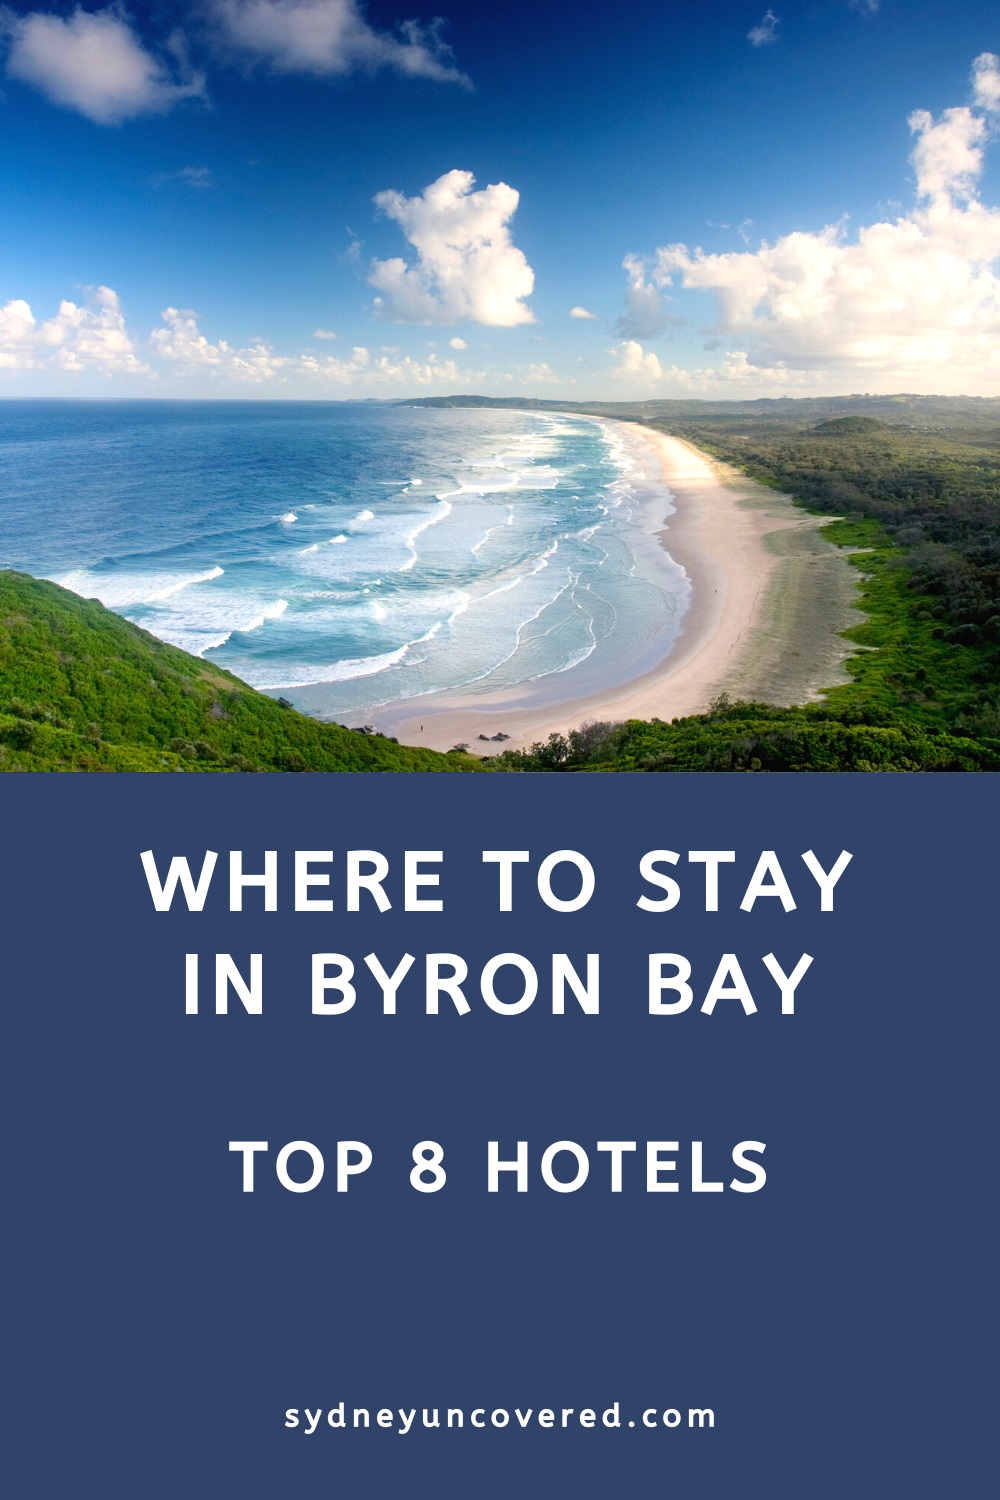 Where to stay in Byron Bay (accommodation guide)